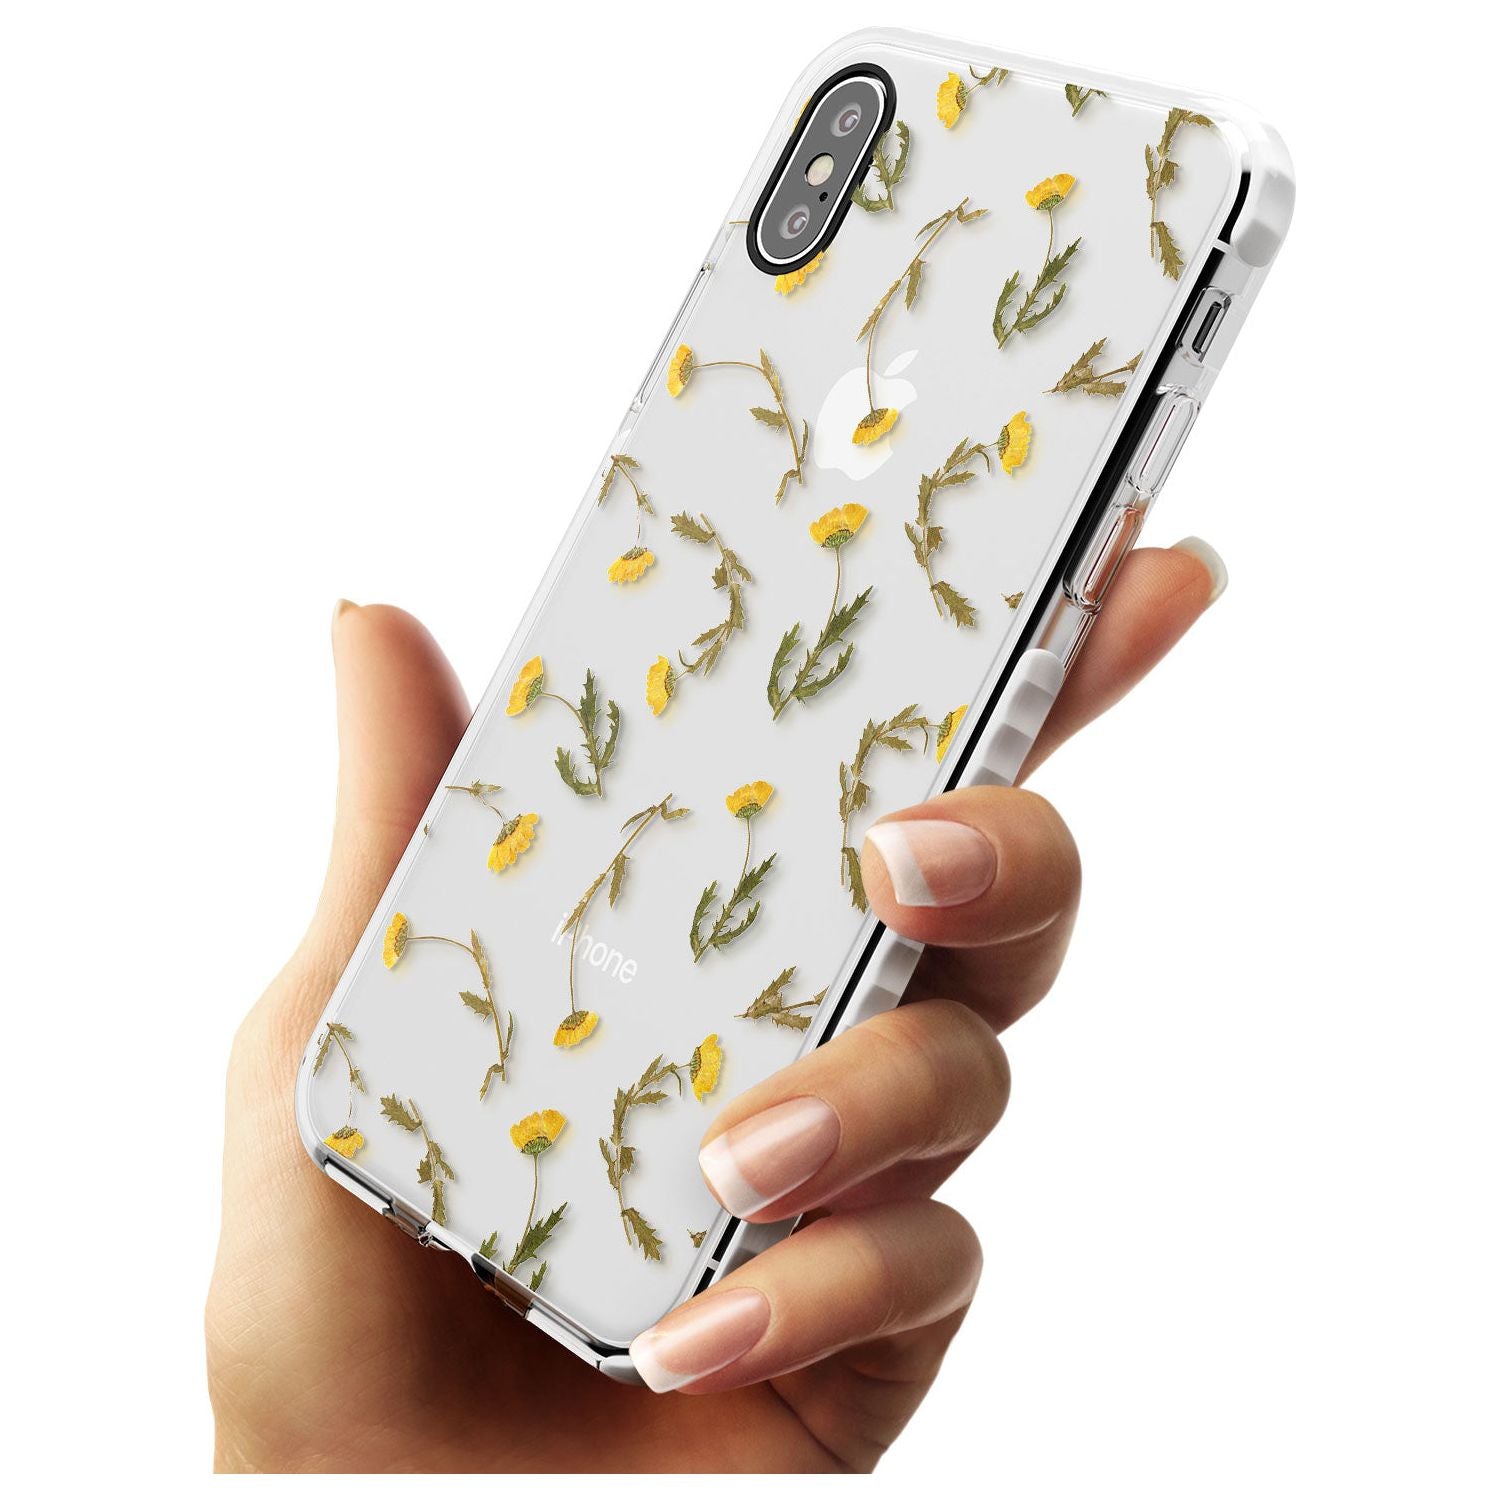 Long Stemmed Wildflowers - Dried Flower-Inspired Impact Phone Case for iPhone X XS Max XR